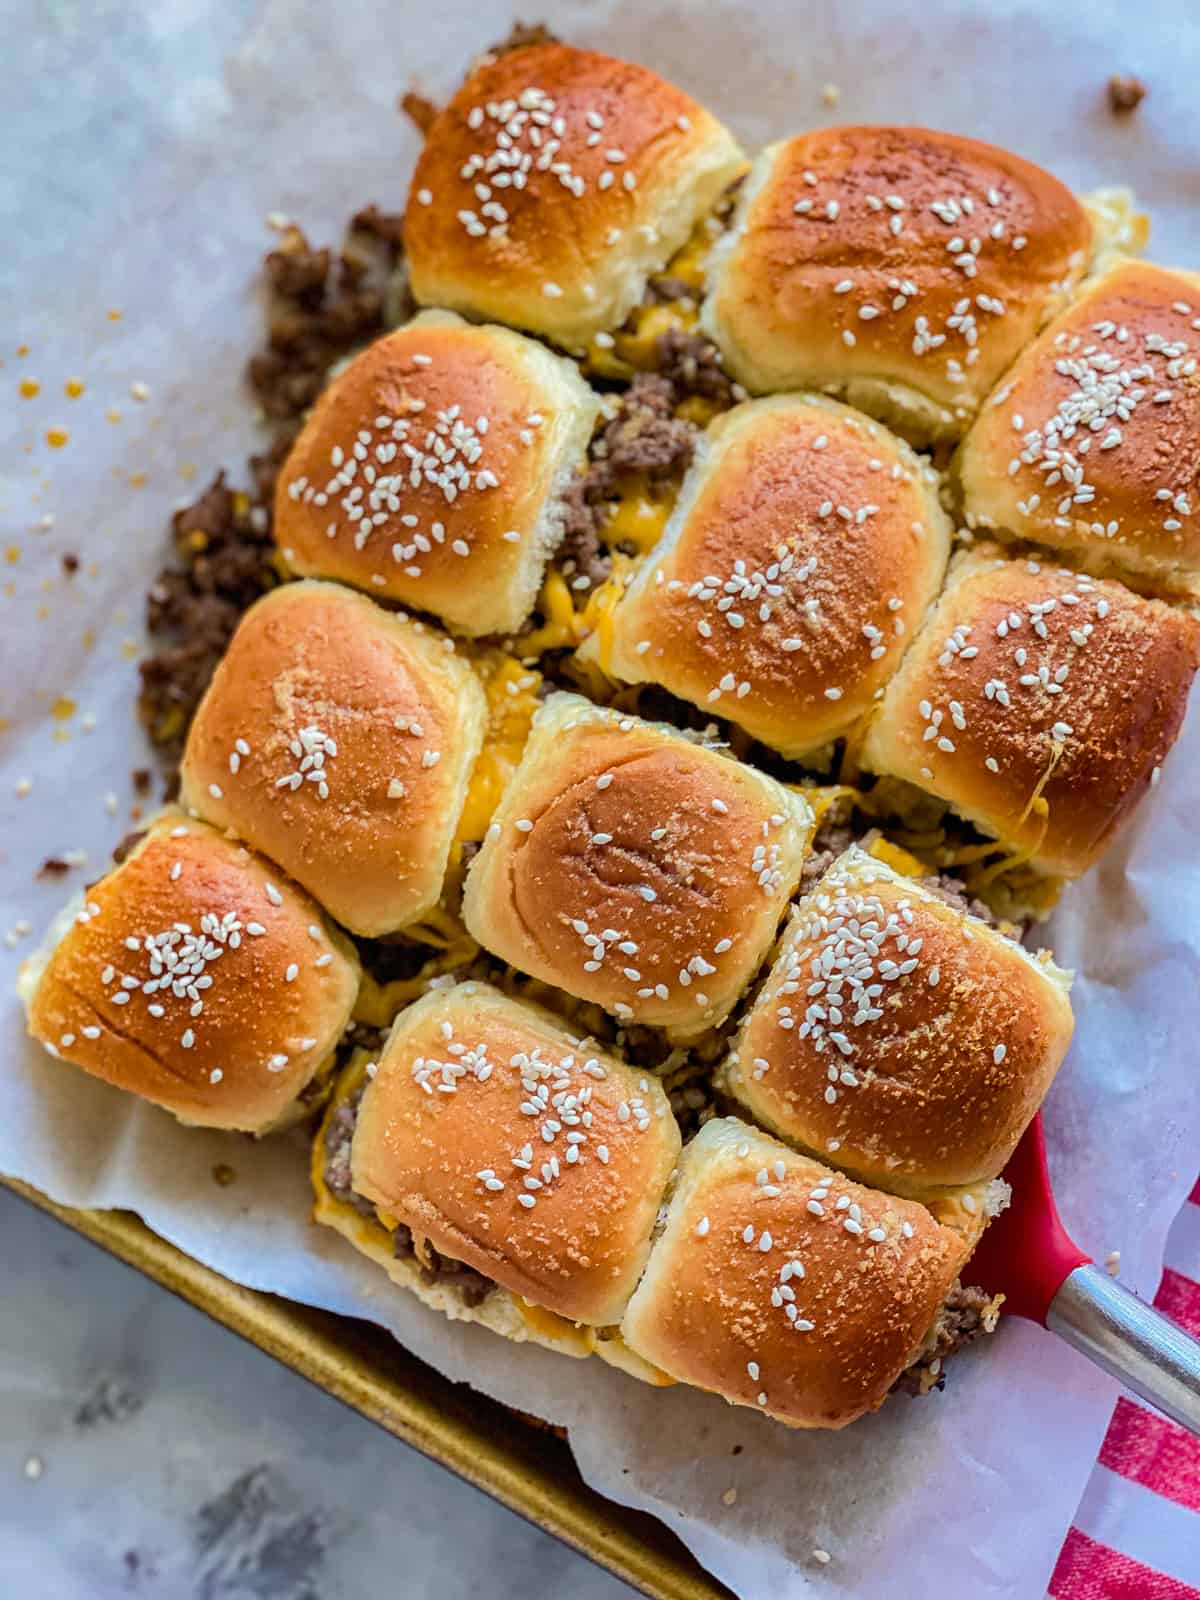 12 cut ground beef and cheese sliderss on a parchment lined baking sheet with a red spatula.